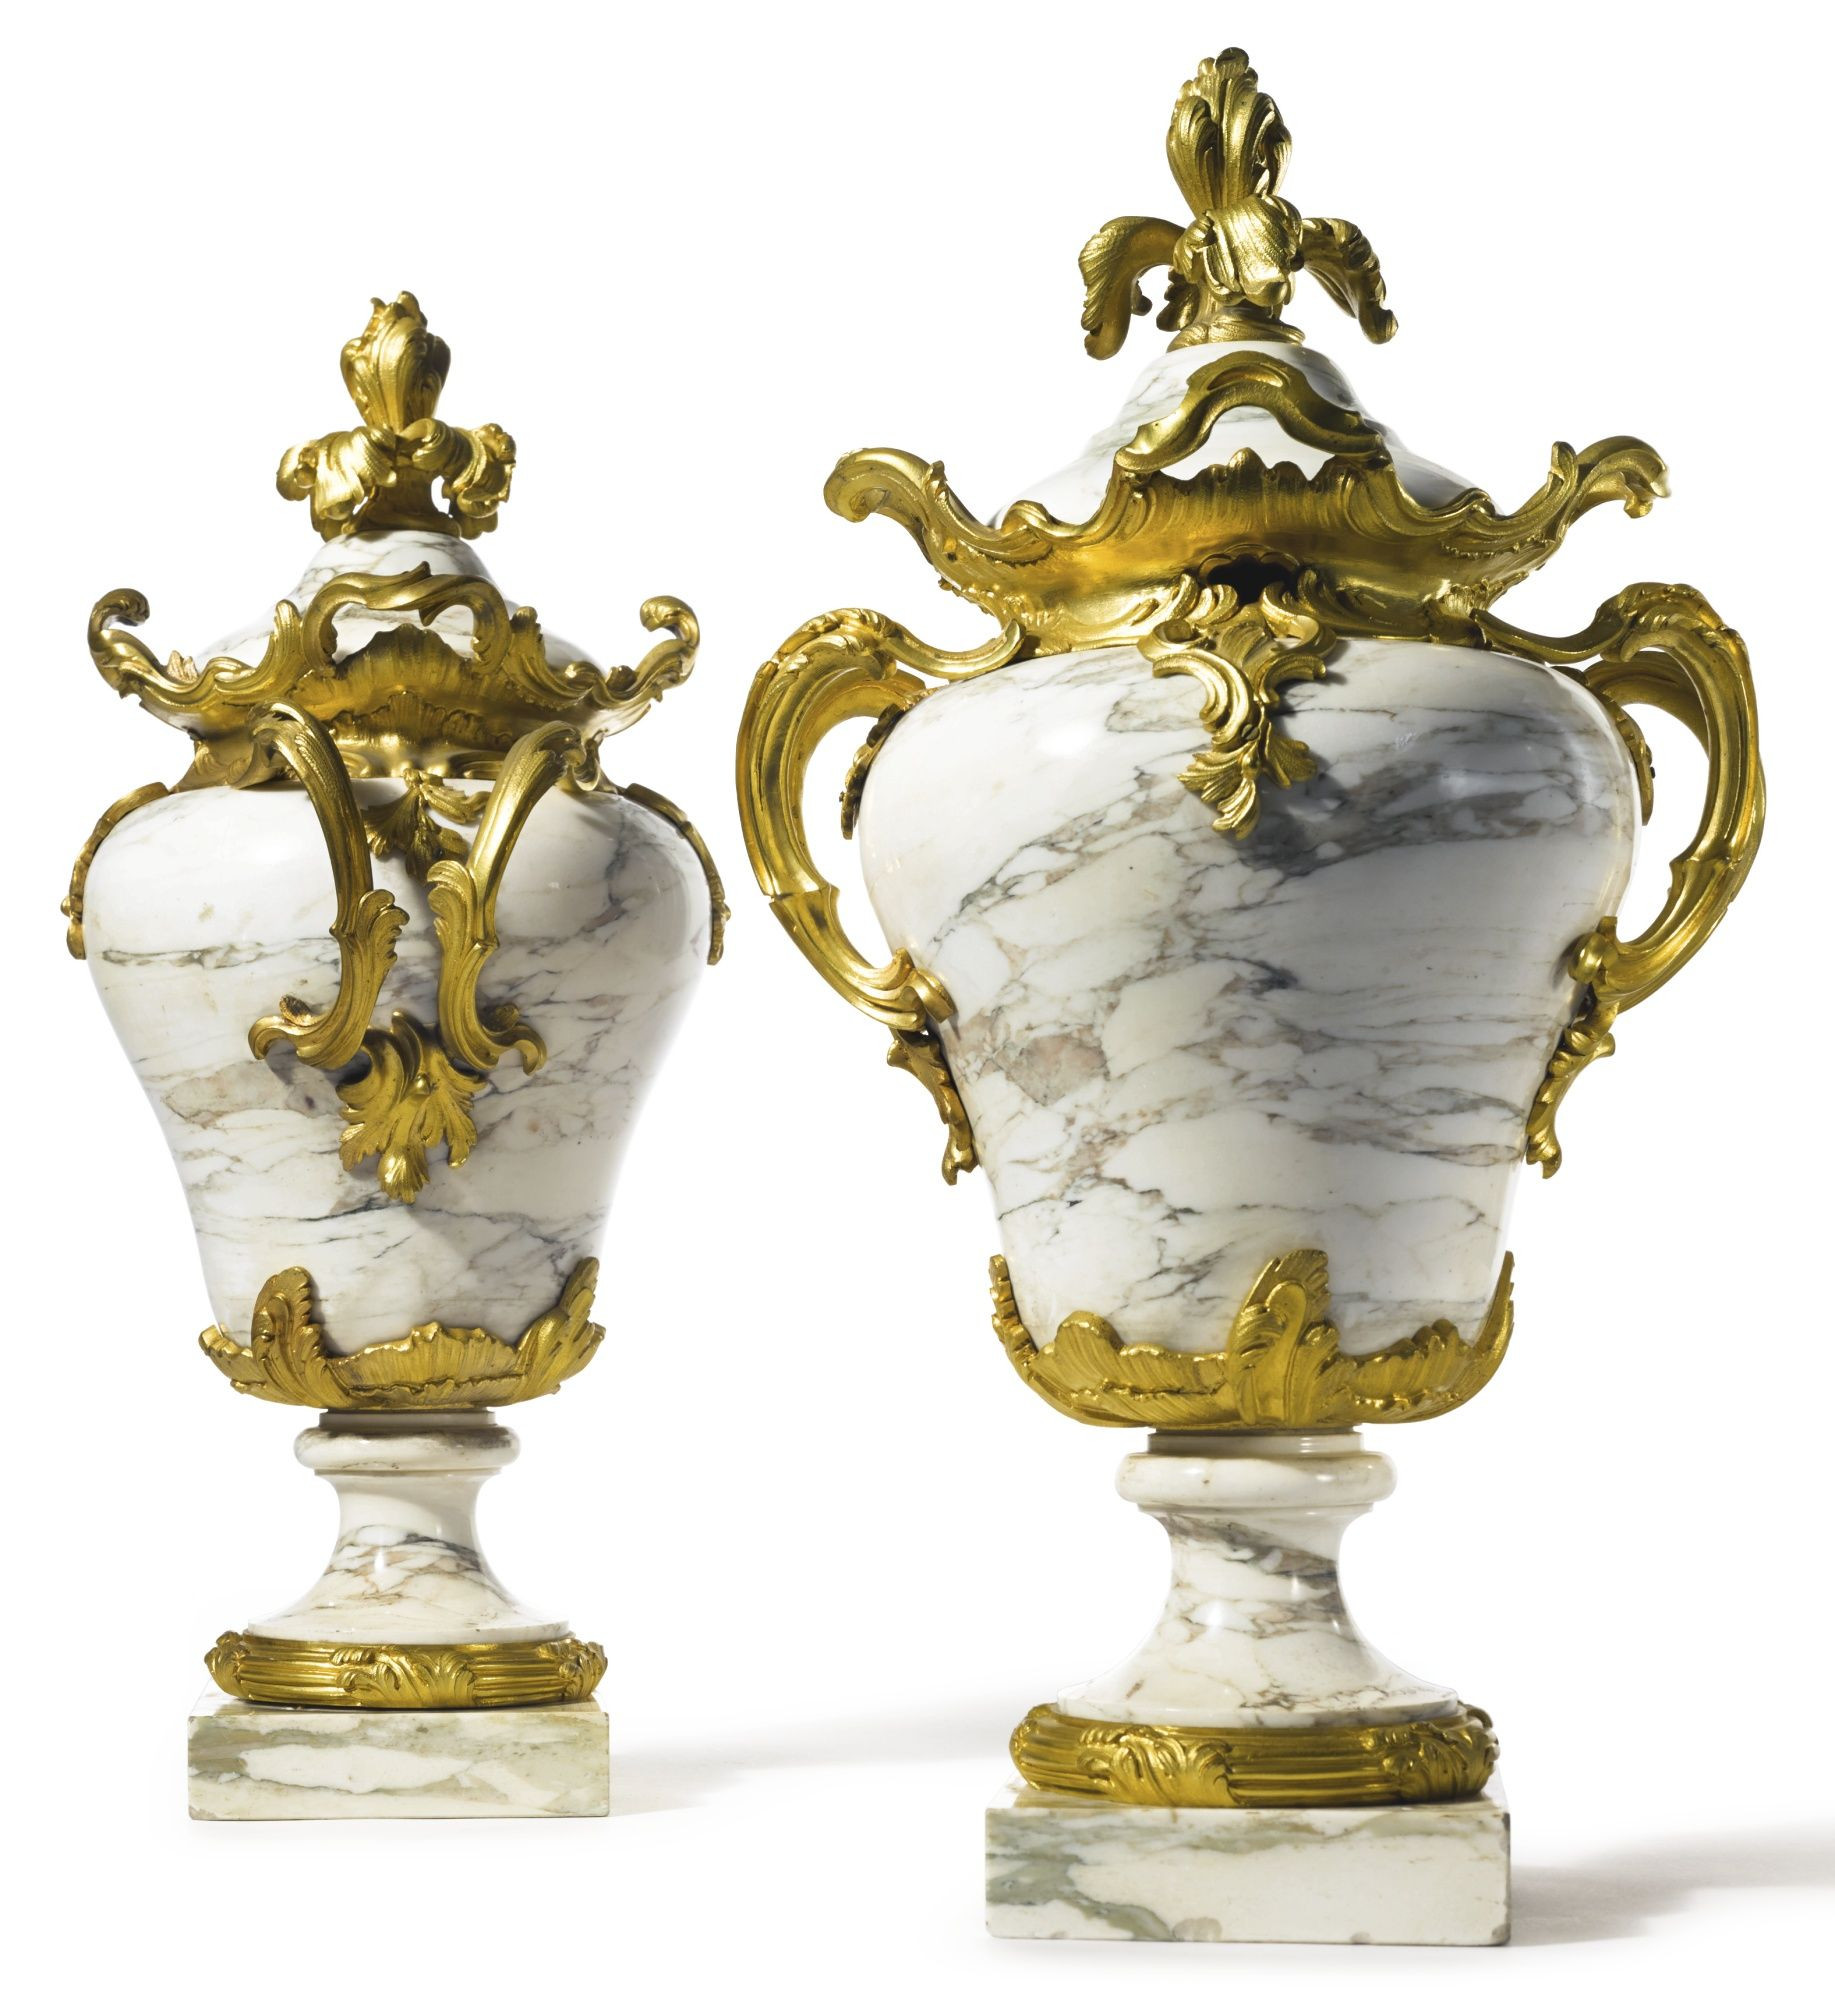 26 Lovely Bronze Vases for Sale 2024 free download bronze vases for sale of a pair of gilt bronze mounted brac2a8che violette marble vasesfrance for a pair of gilt bronze mounted brac2a8che violette marble vasesfrance